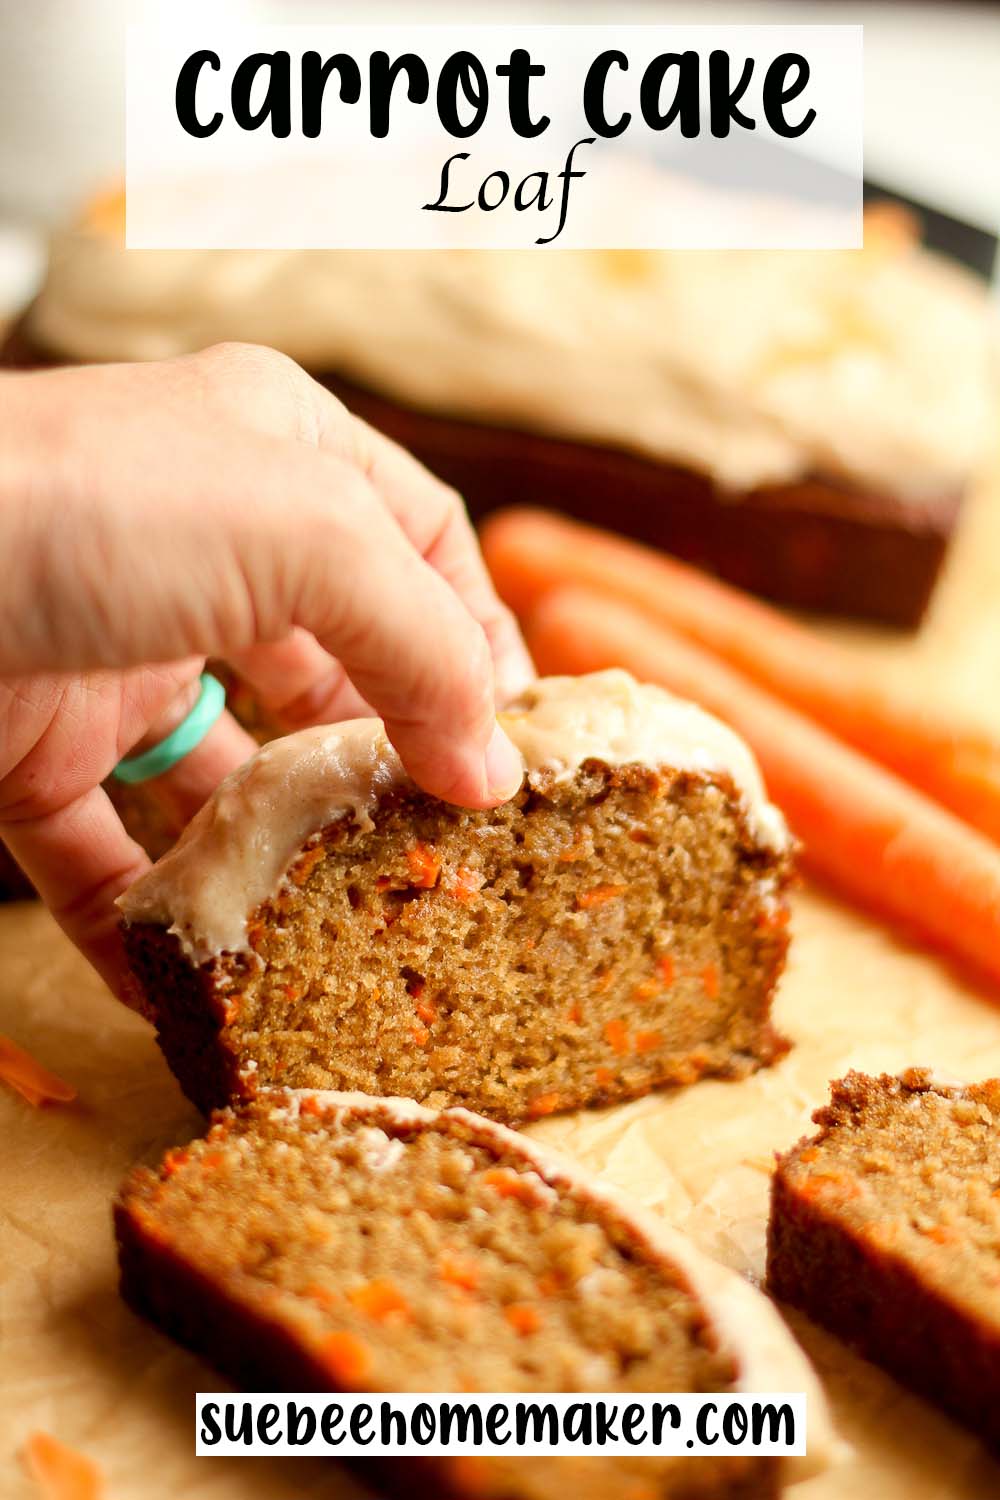 Side view of a hand lifting up a slice of iced carrot cake loaf.